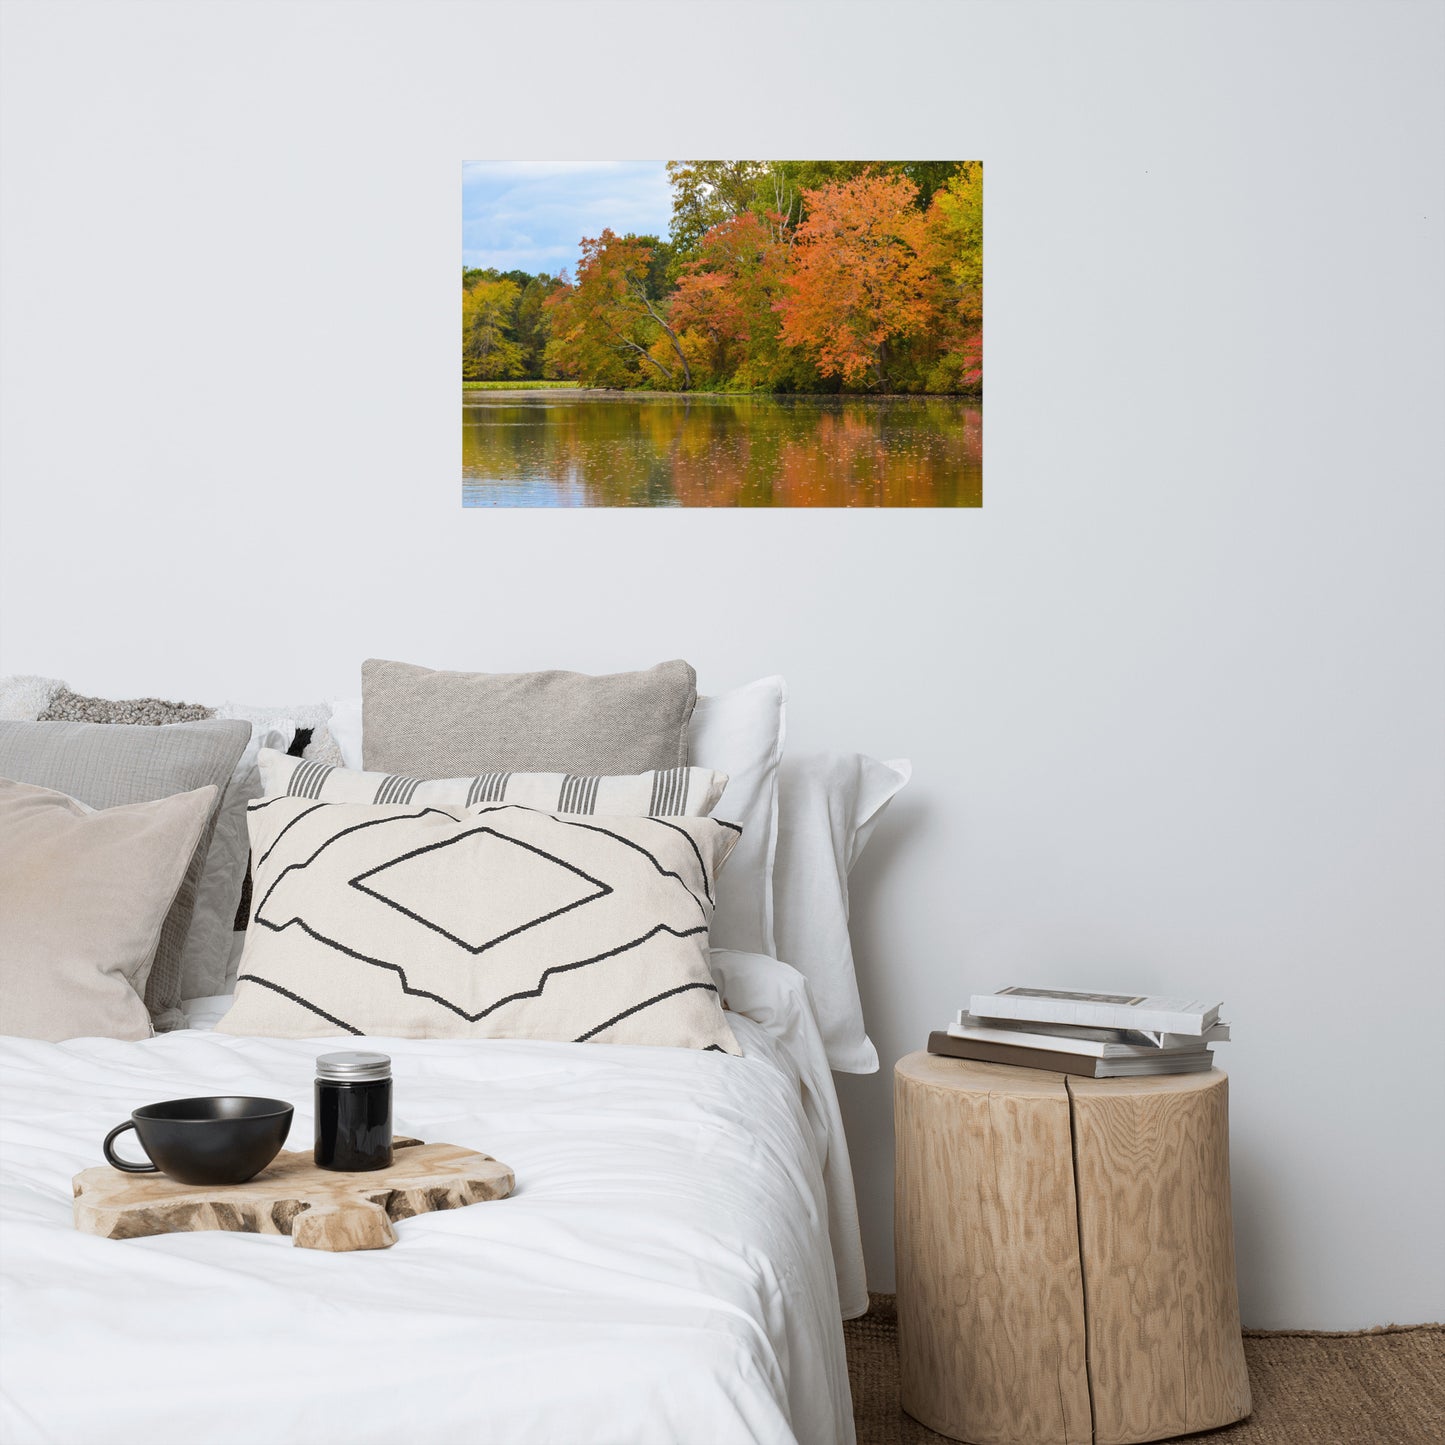 Art Above Headboard: Colorful Trees in Fall Color Edge of Pond - Rural / Country Style Landscape / Nature Loose / Unframed / Frameless / Frameable Photograph Wall Art Print - Artwork